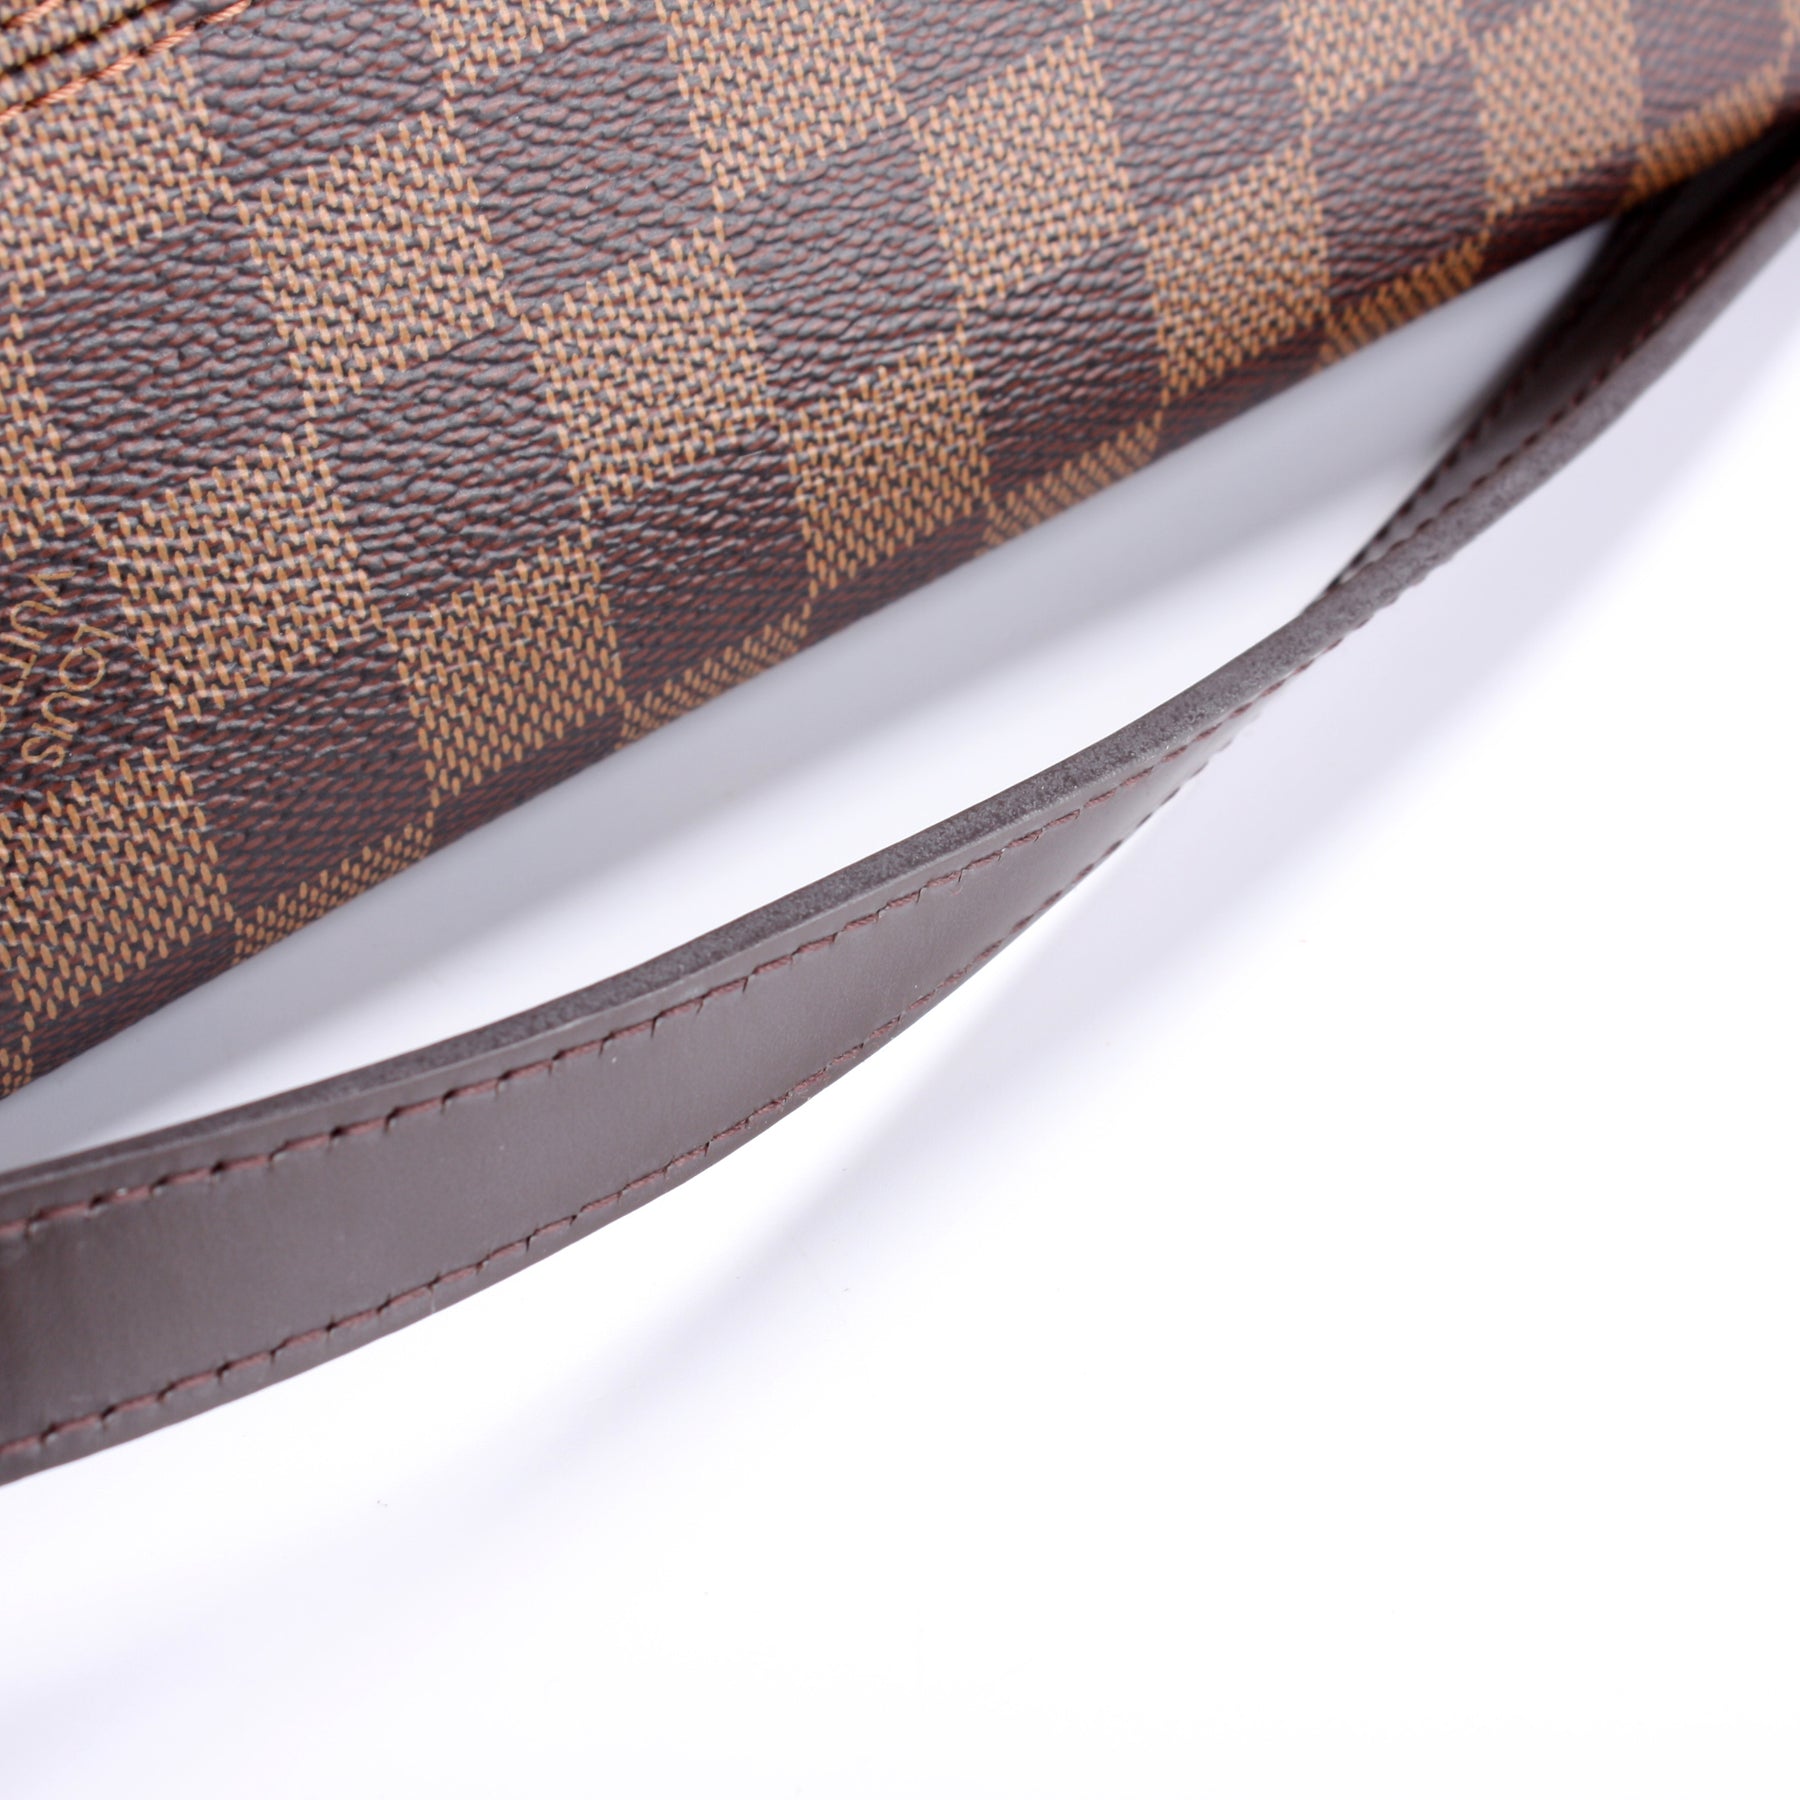 Louis Vuitton Brittany Damier Ebene Coated Canvas Top Handle Bag on SALE